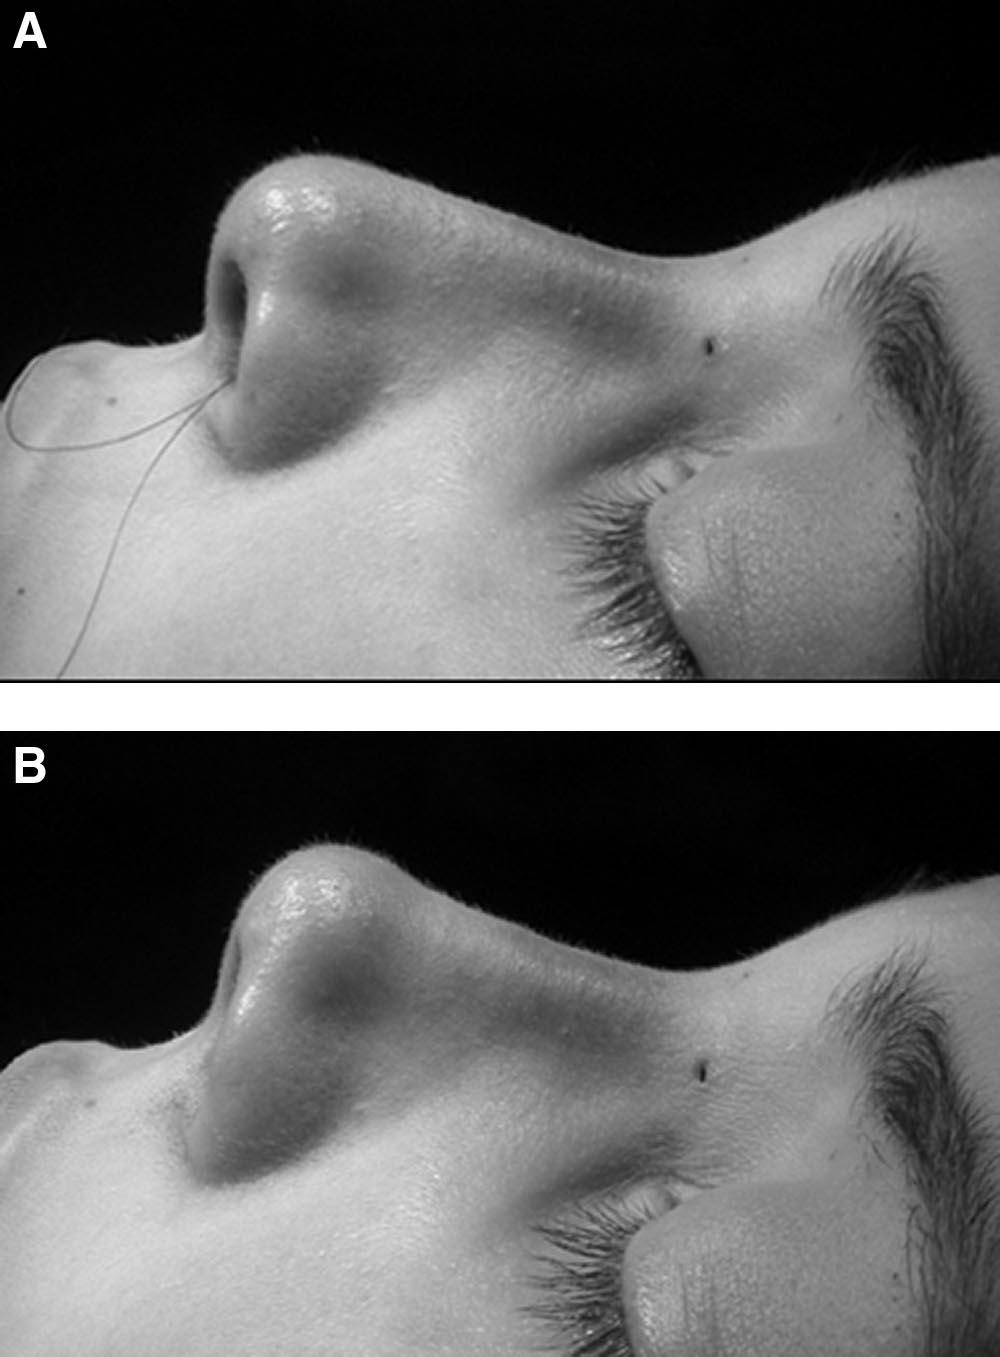 Annals of Plastic Surgery Volume 59, Number 3, September 2007 FIGURE 4. A, B, Before and after the application of the septocolumellar suture on another patient.